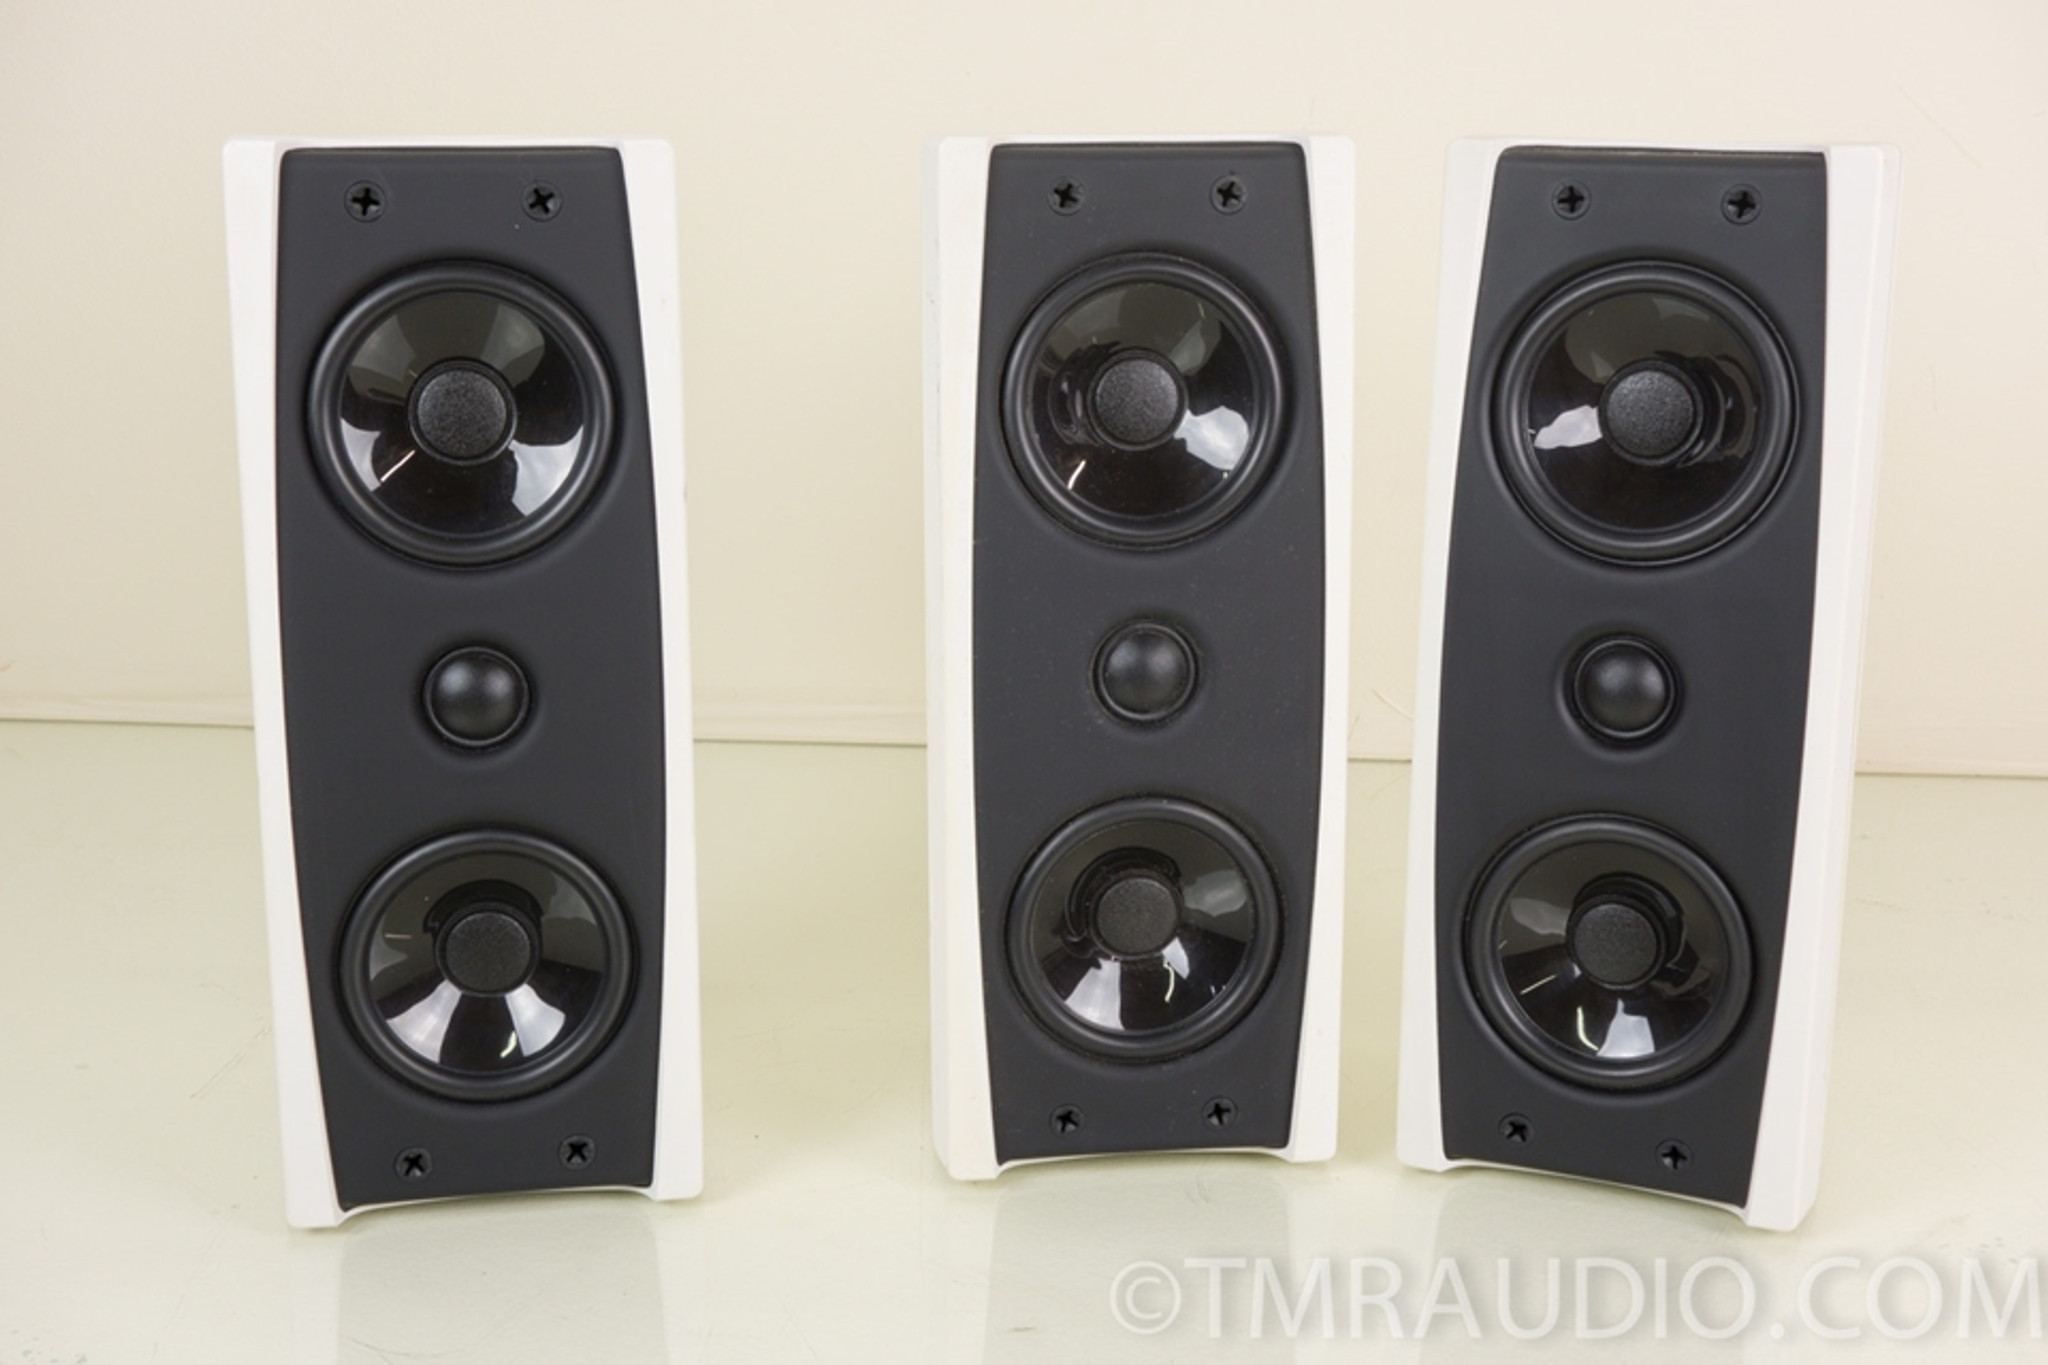 cambridge soundworks speakers sbs52 disassembly